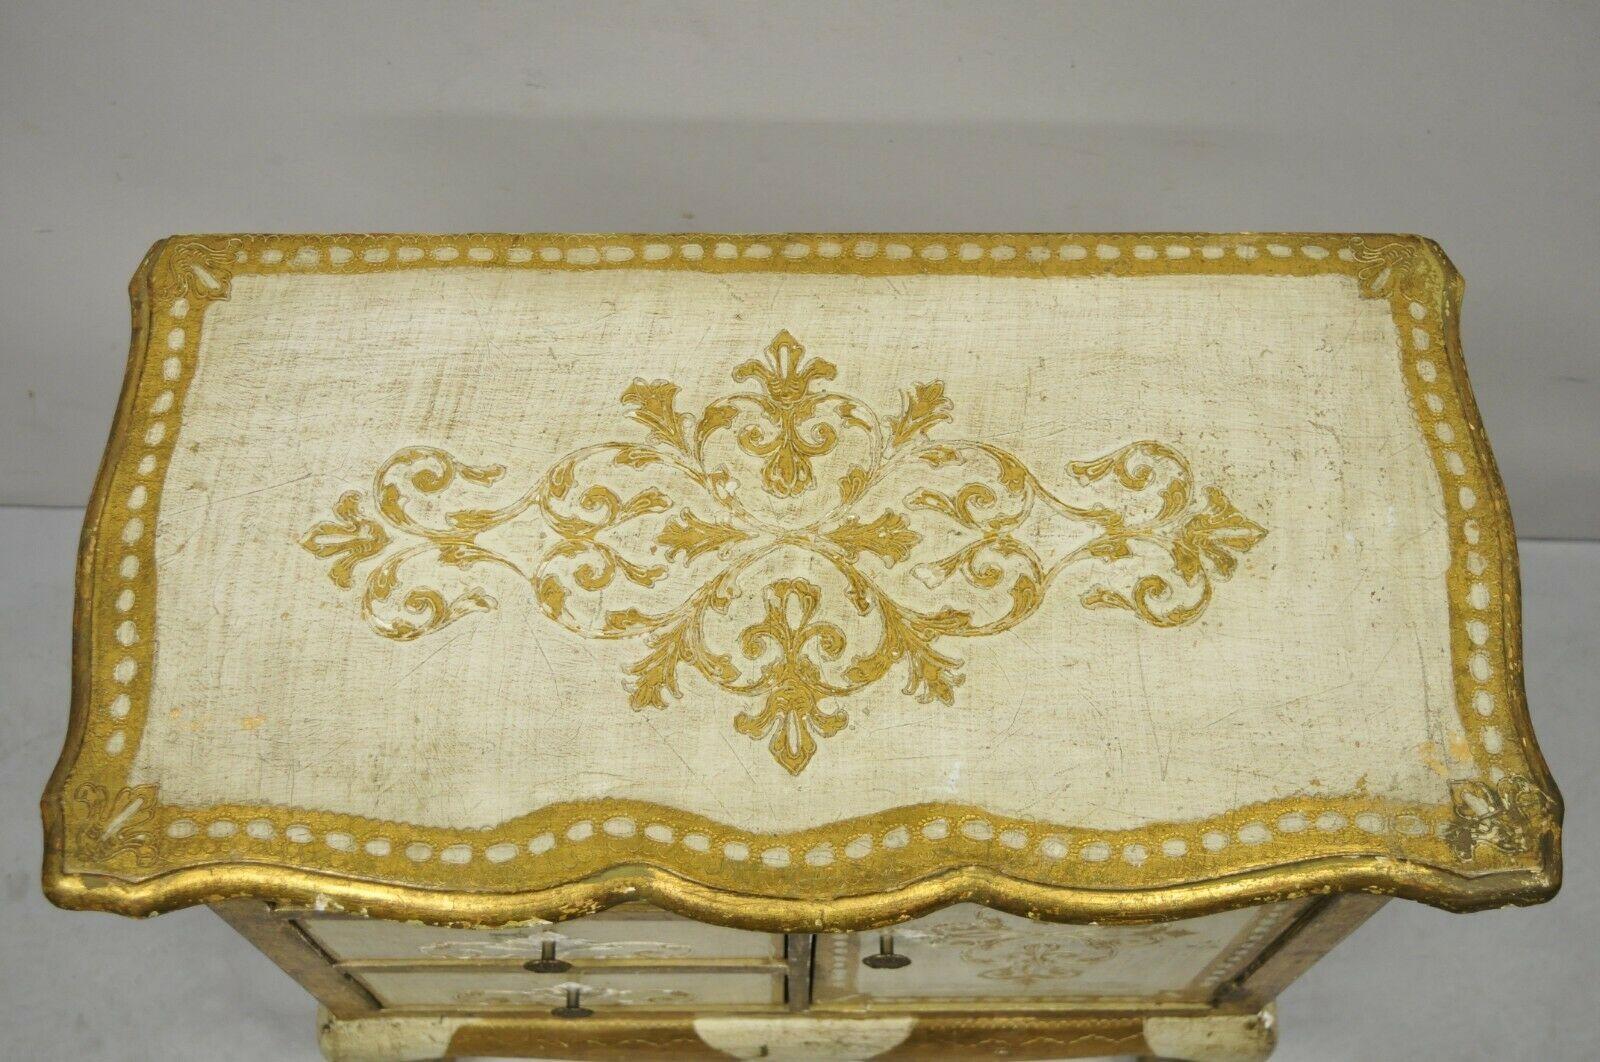 Hollywood Regency Vintage Italian Florentine Cream and Gold Small Nightstand Side Table Cabinet